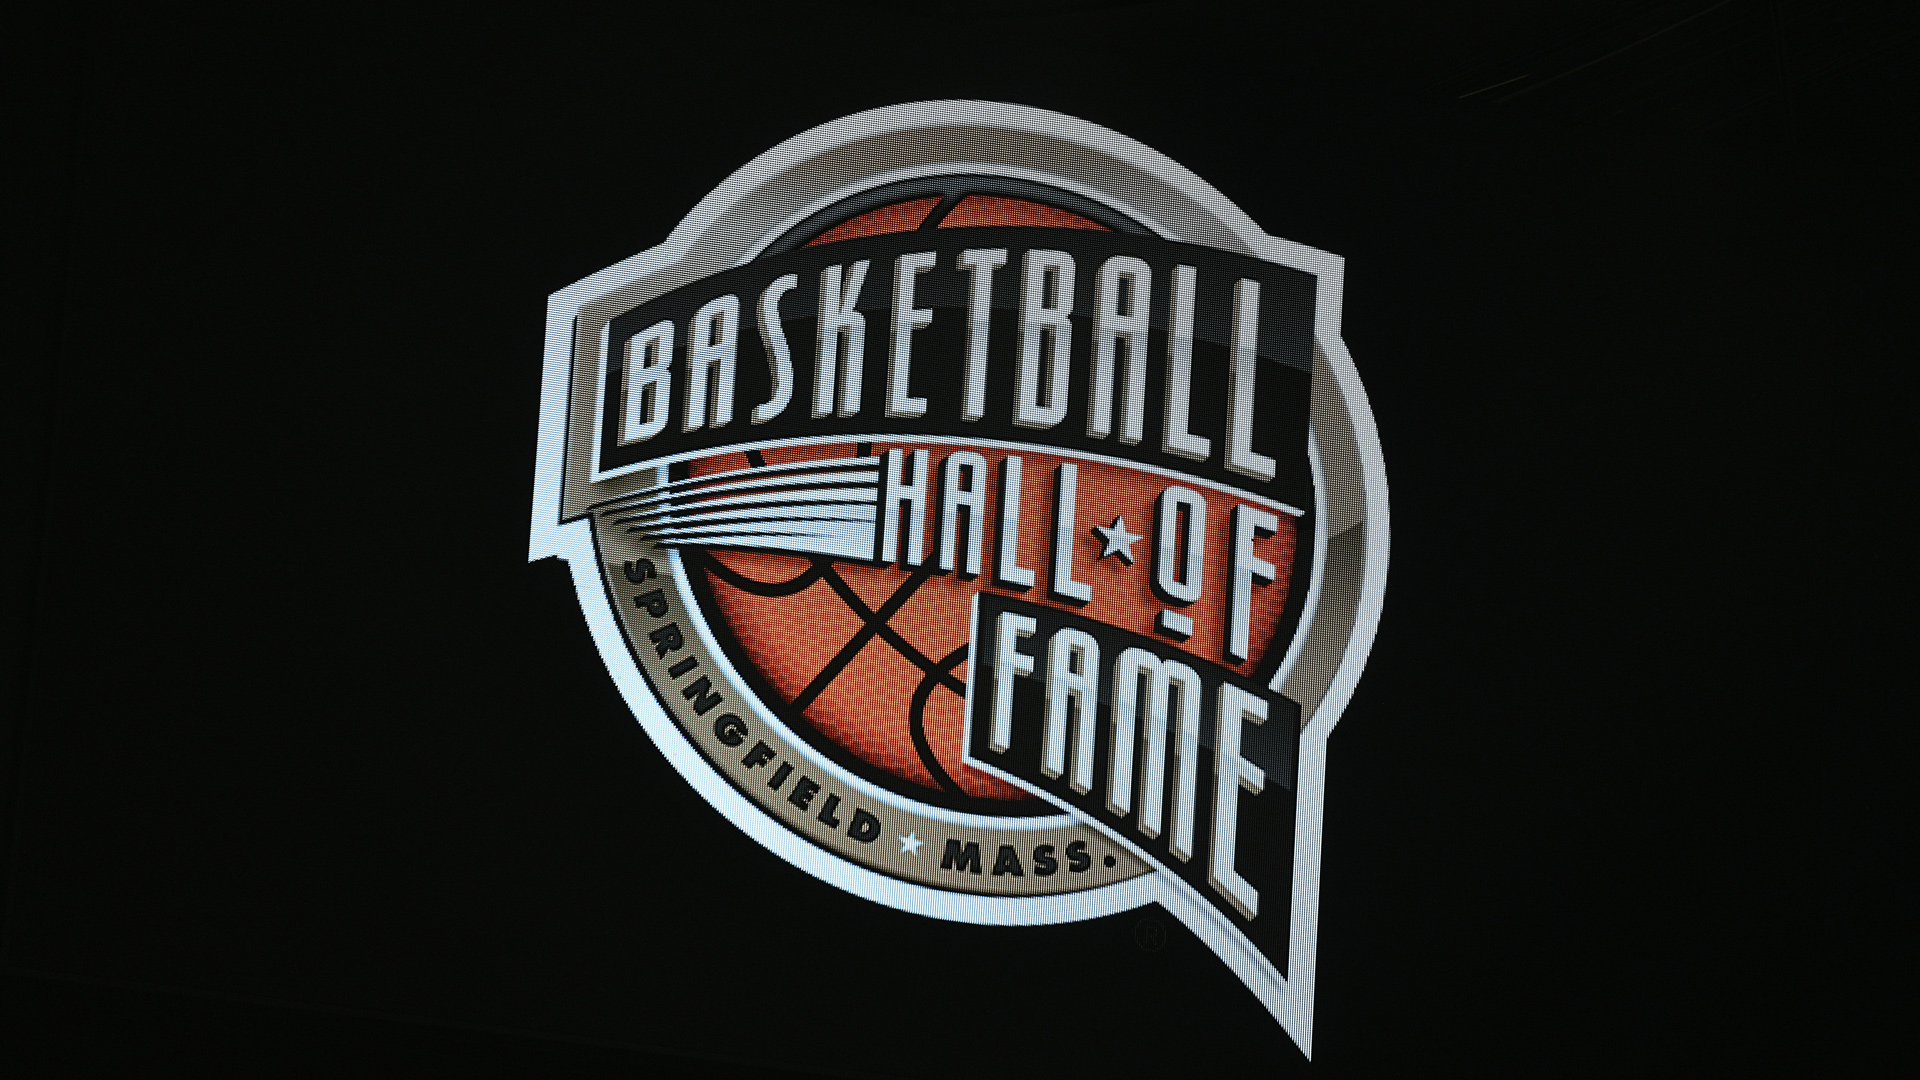 How to Watch the Basketball Hall of Fame Induction Ceremony